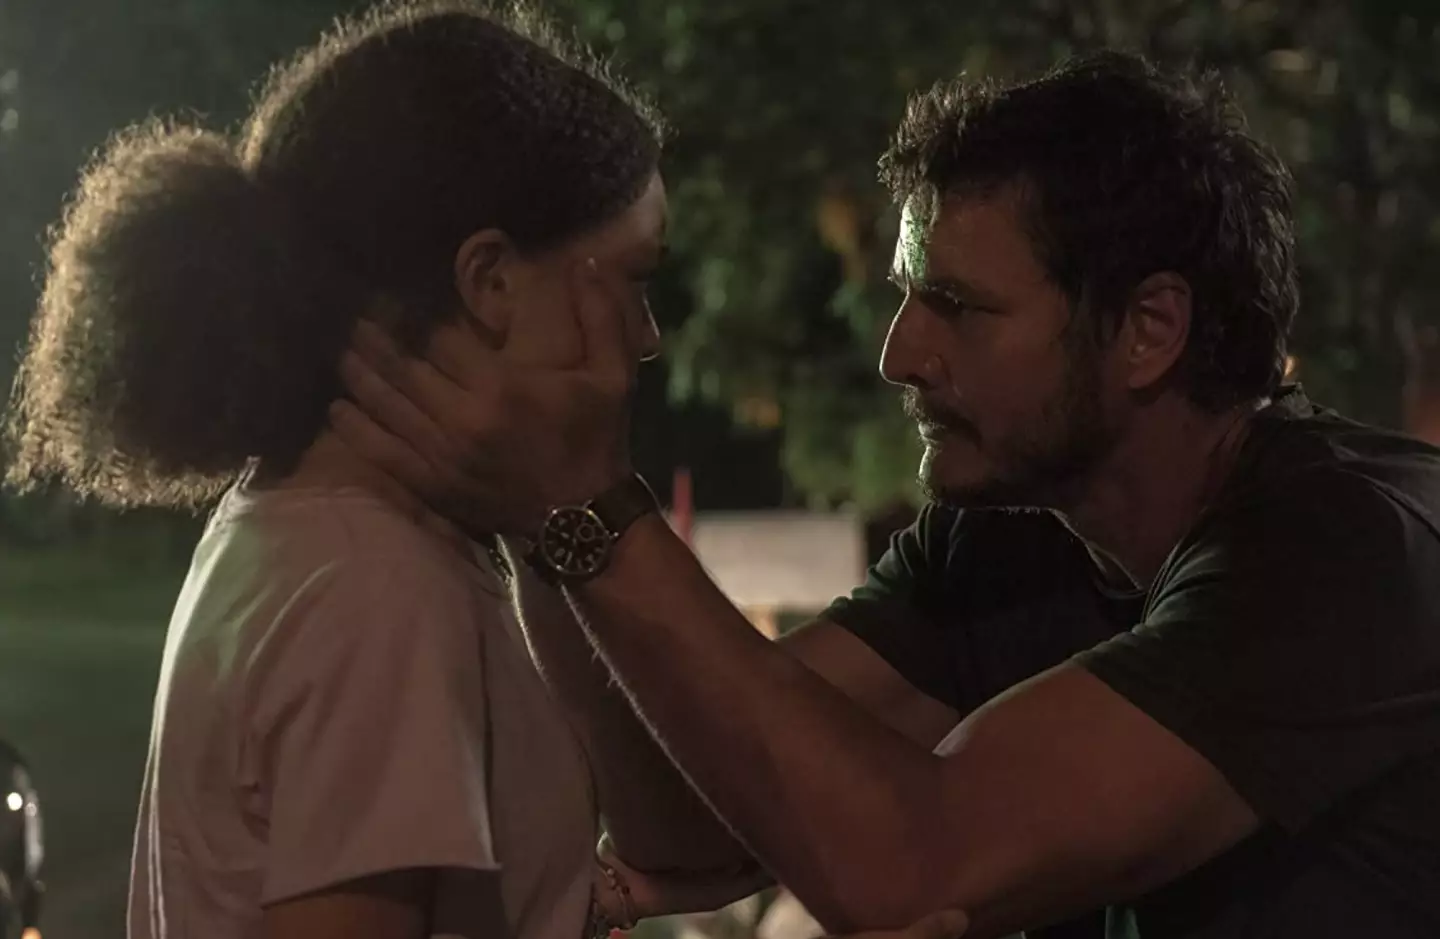 The Last Of Us stars Pedro Pascal and Bella Ramsey.